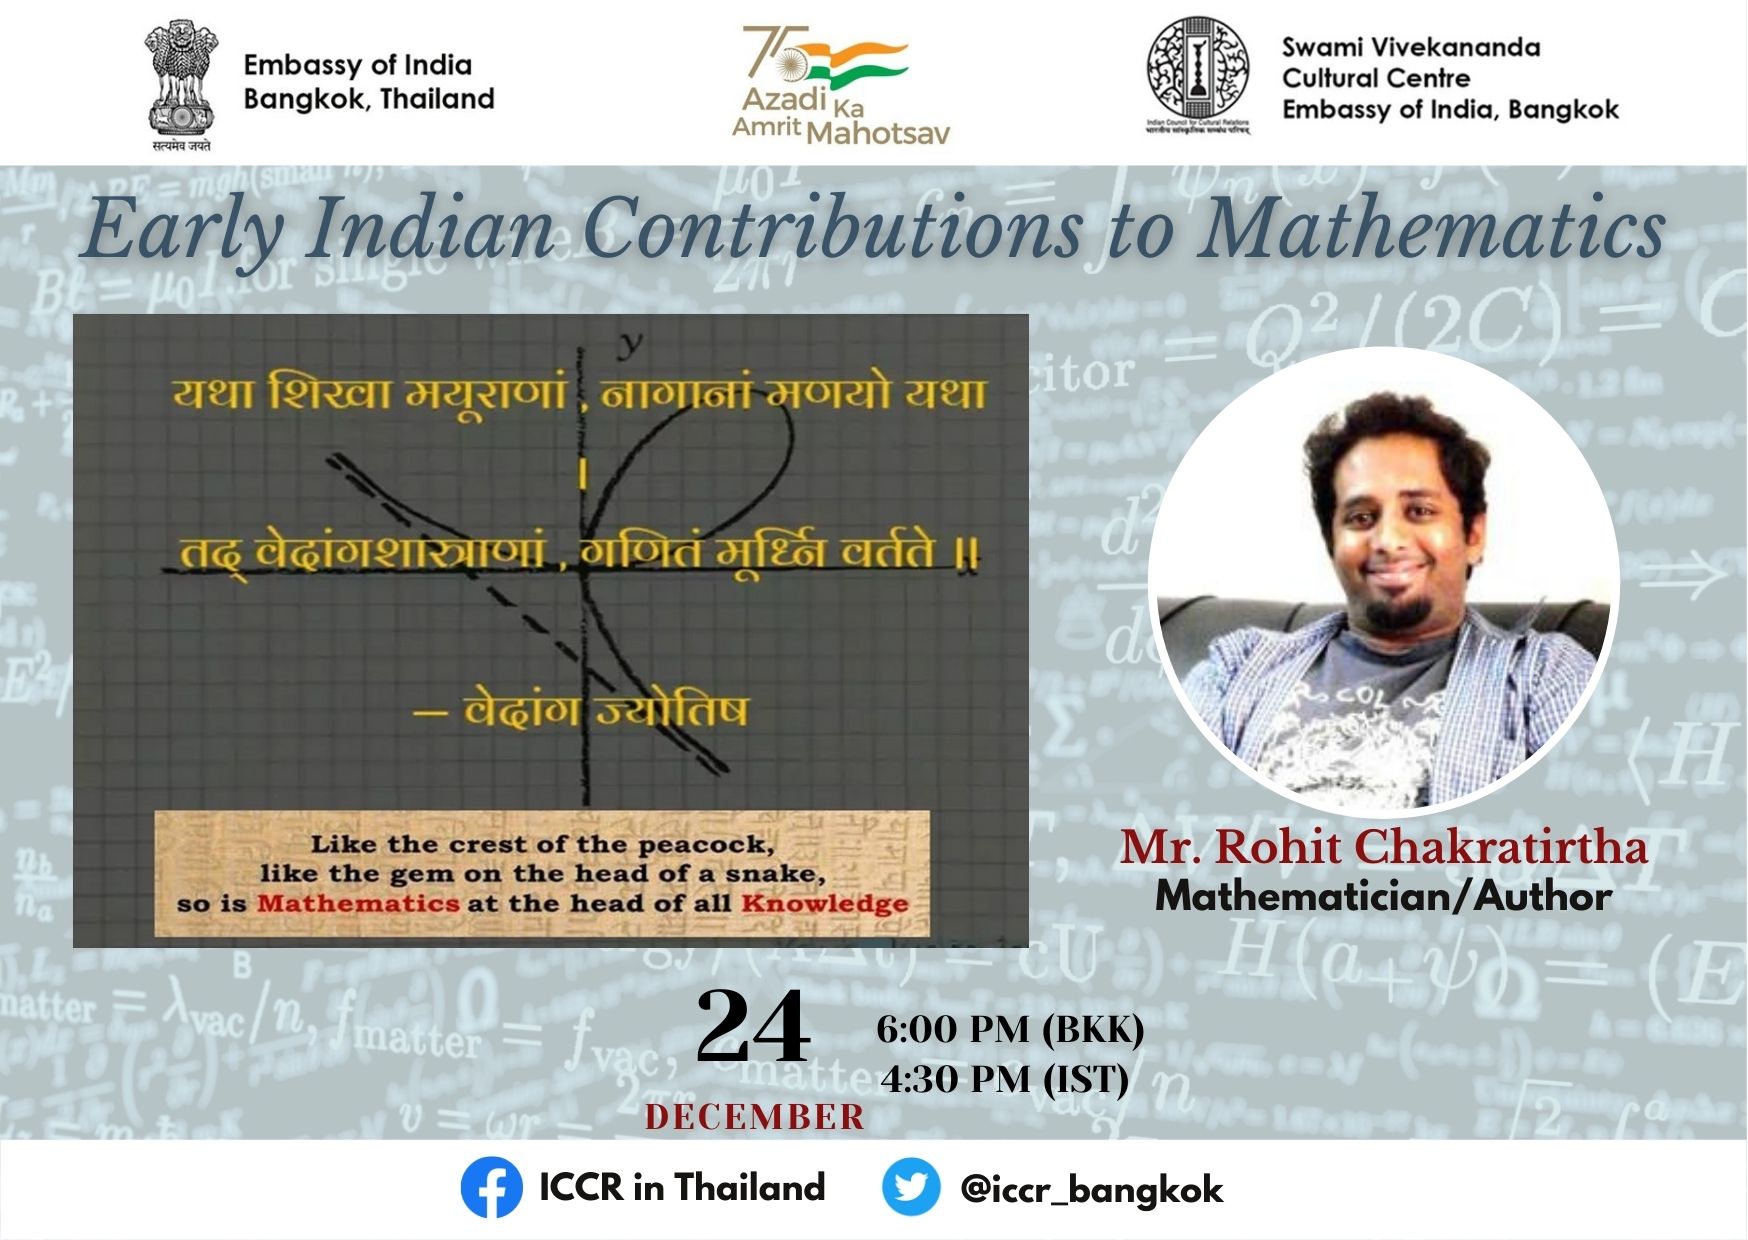 SVCC's event Presenting "Early Indian Contributions to Mathematics" by Mr.Rohith Chakratirtha, mathematician/author